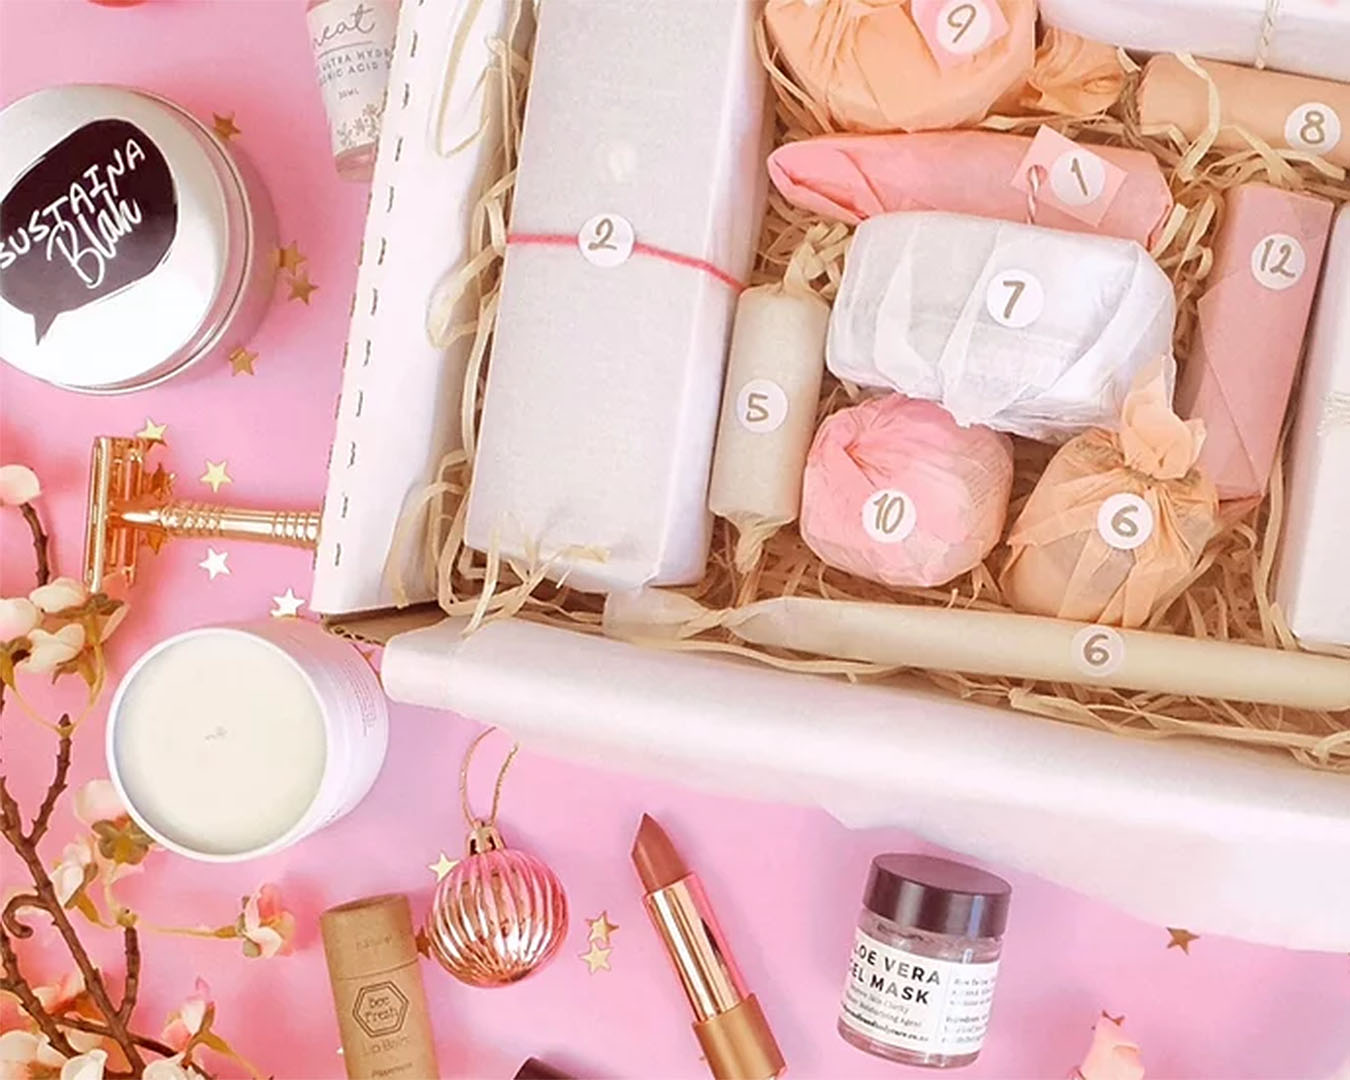 The beauty days beauty advent calendar boxed up with unwrapped products spread around.